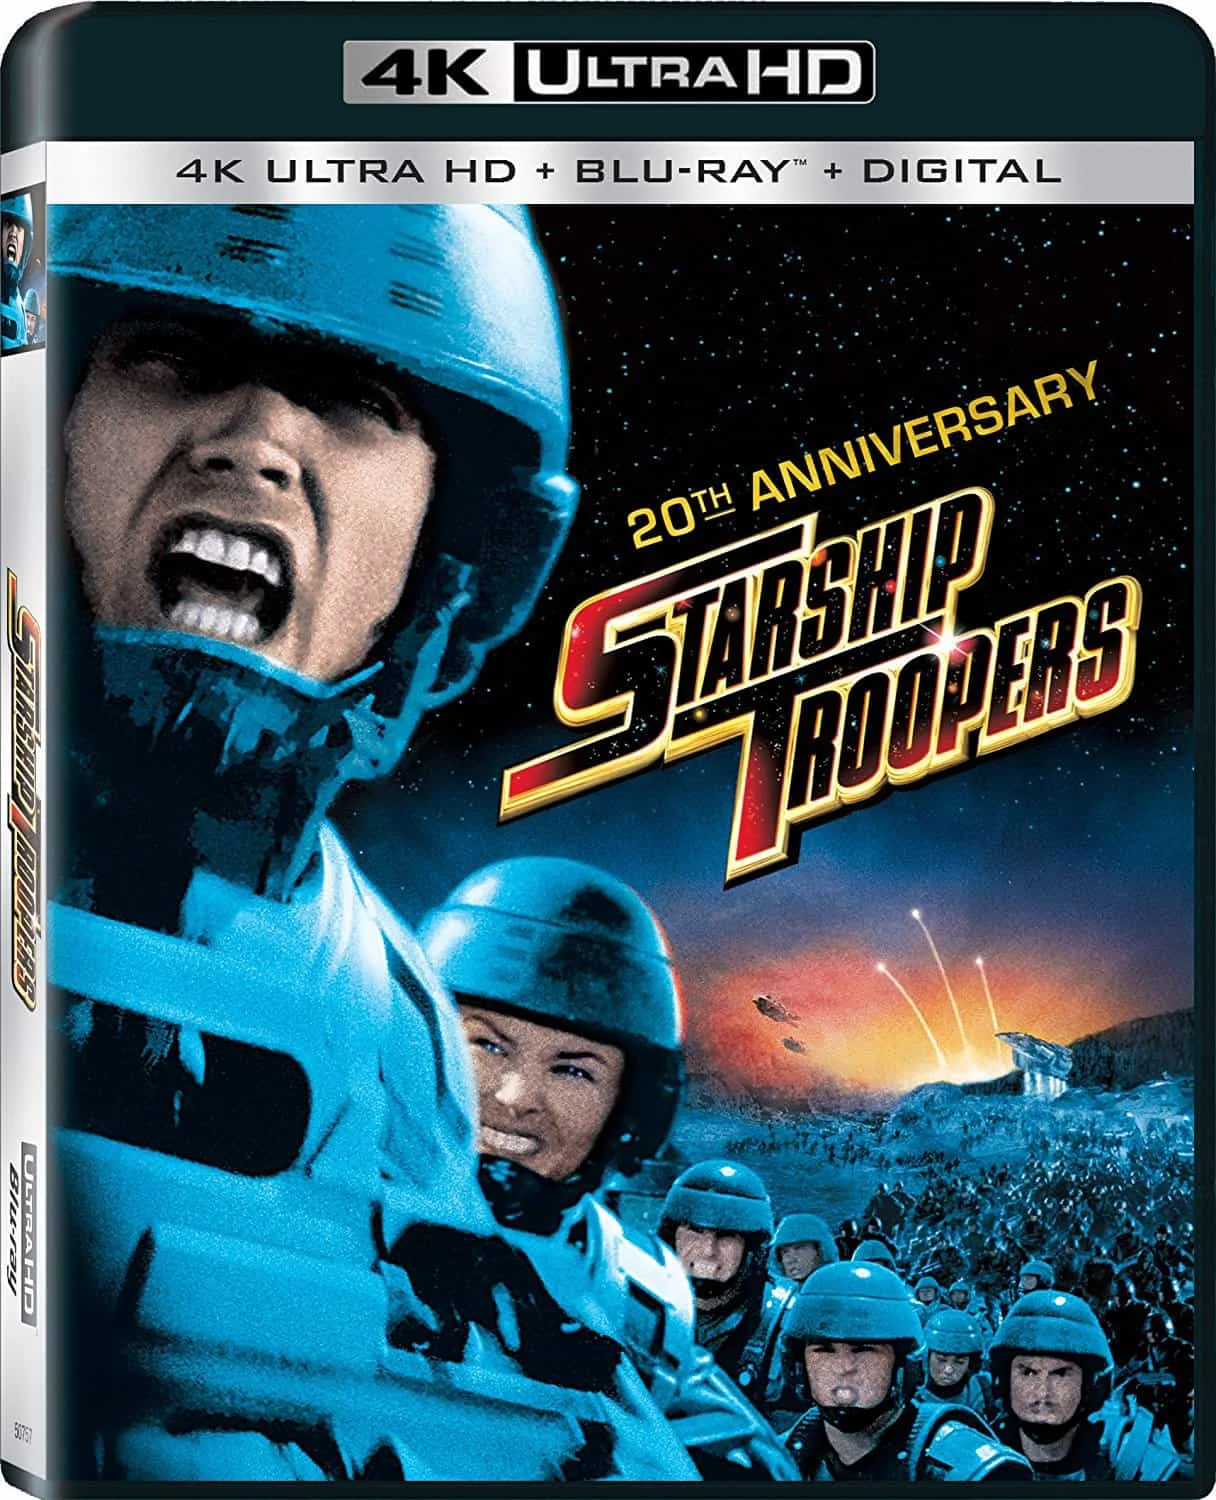 Starship Troopers 4K 1997 poster